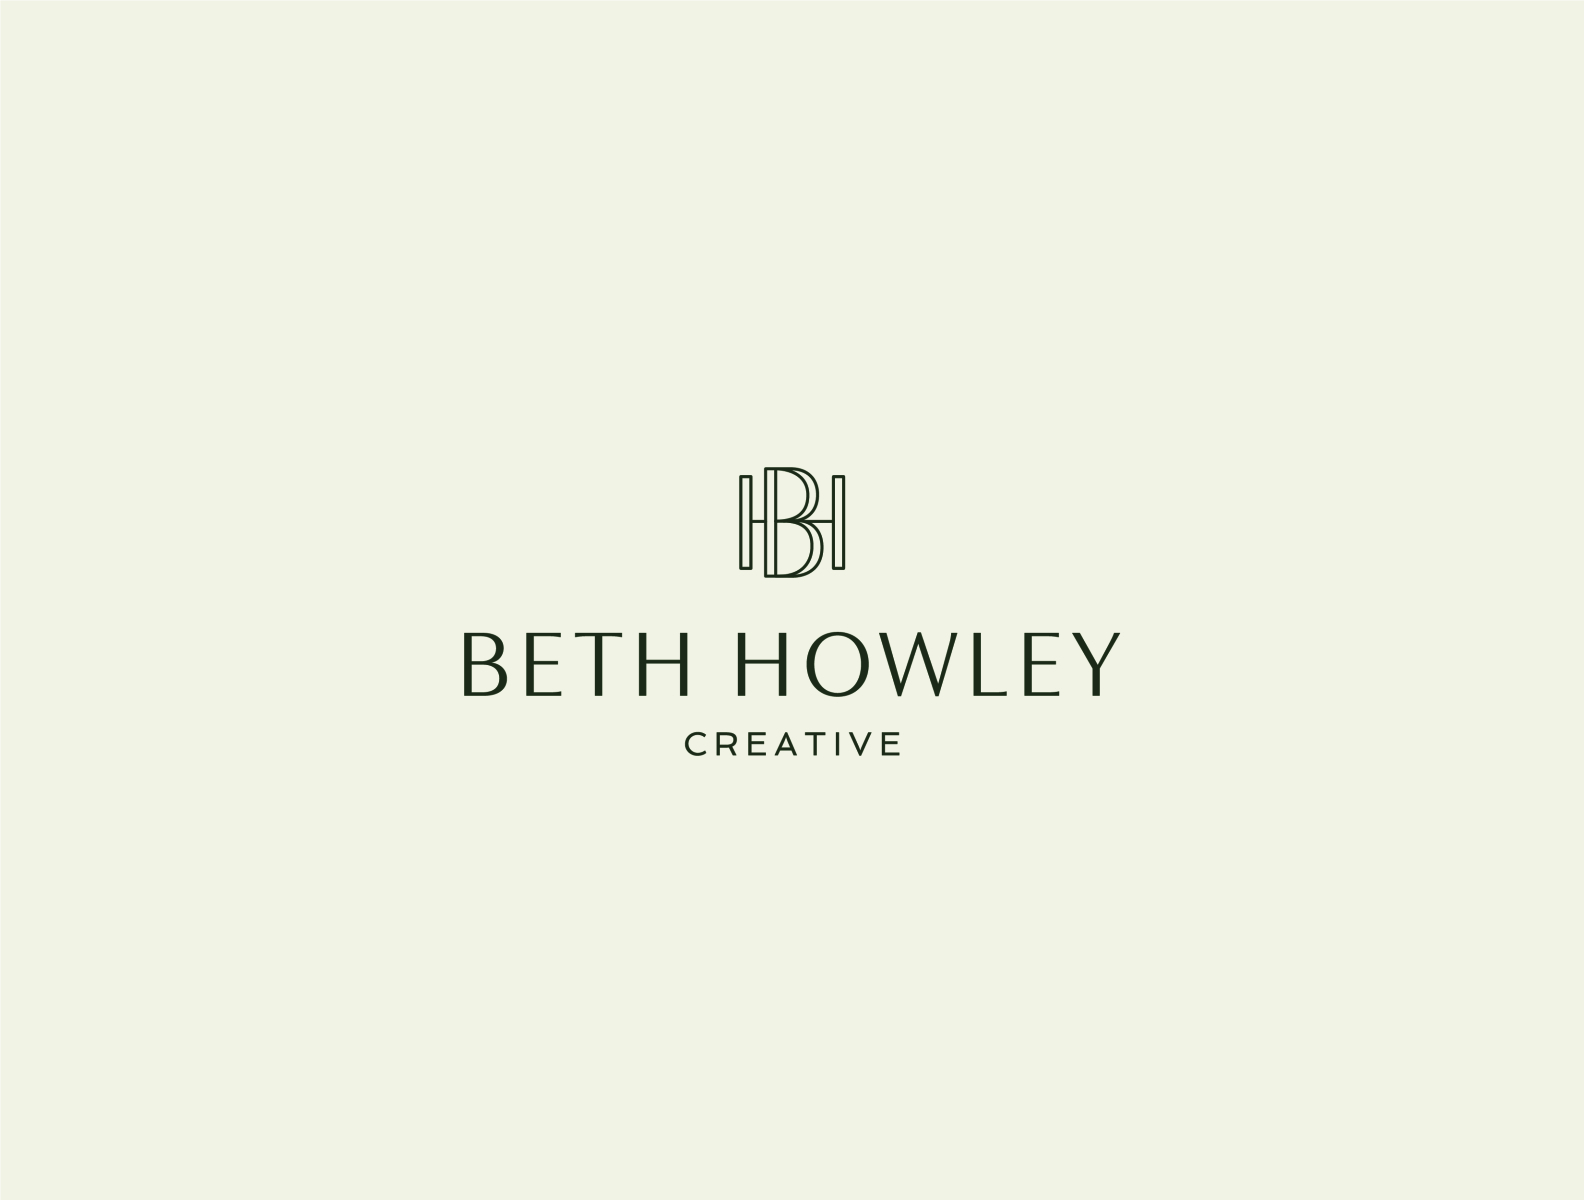 BHC letter logo creative design with vector graphic, BHC simple and modern  logo in triangle shape.:: tasmeemME.com